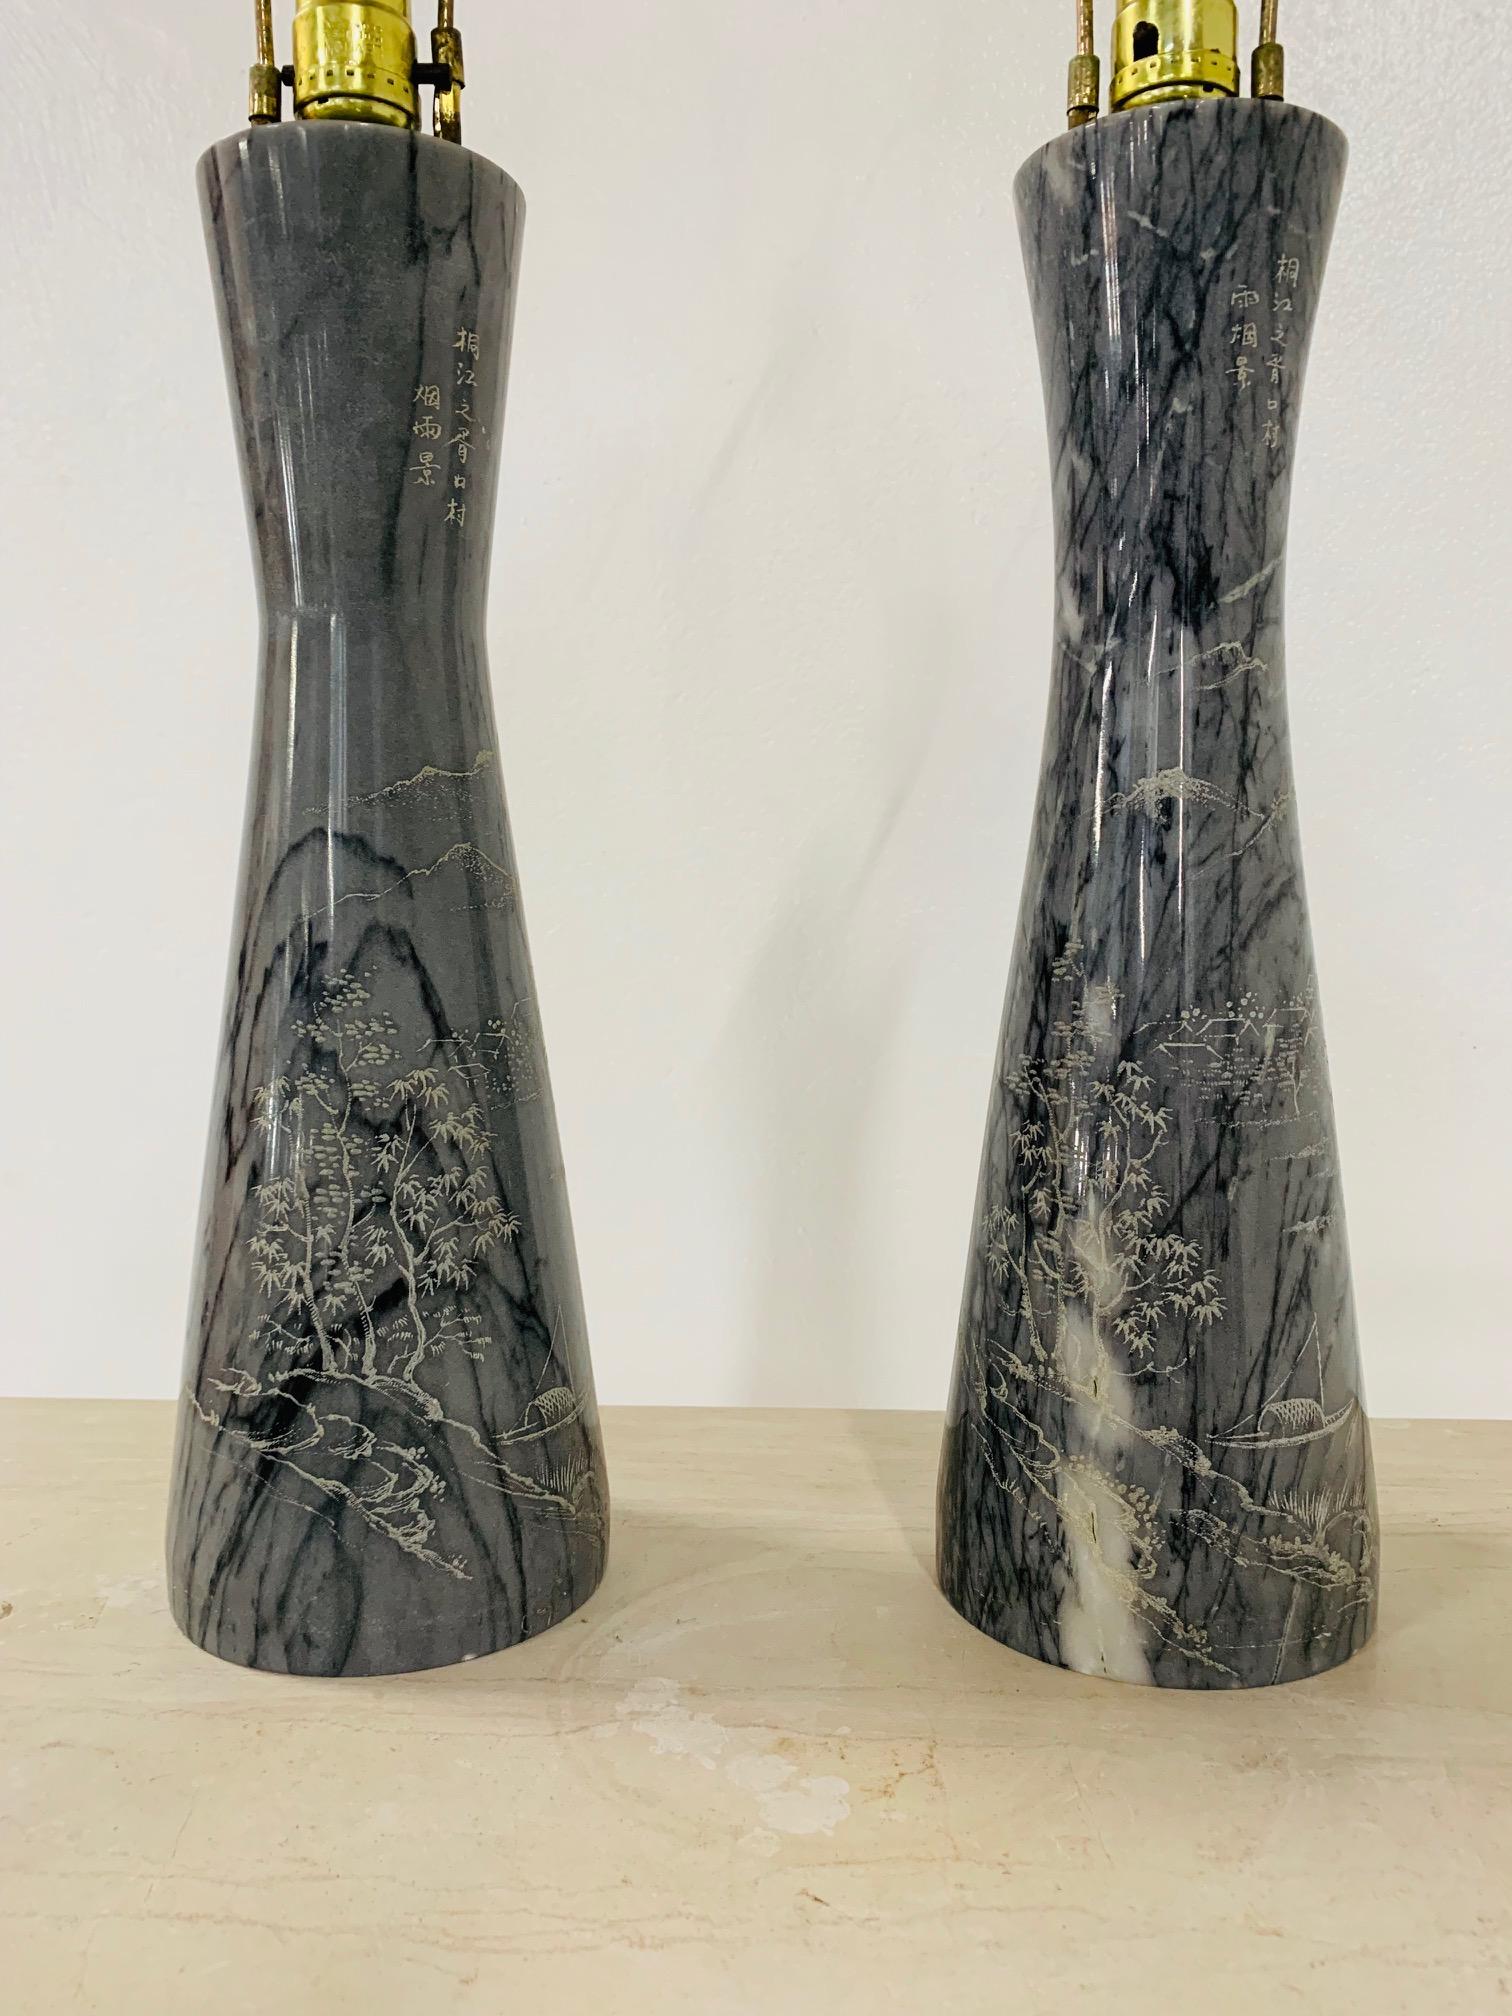 Pair of etched Asian Themed marble lamps. The lamps have an etched, outdoor Asian scenery theme.
Measures: 31.5 height (top of finial). Base: 5